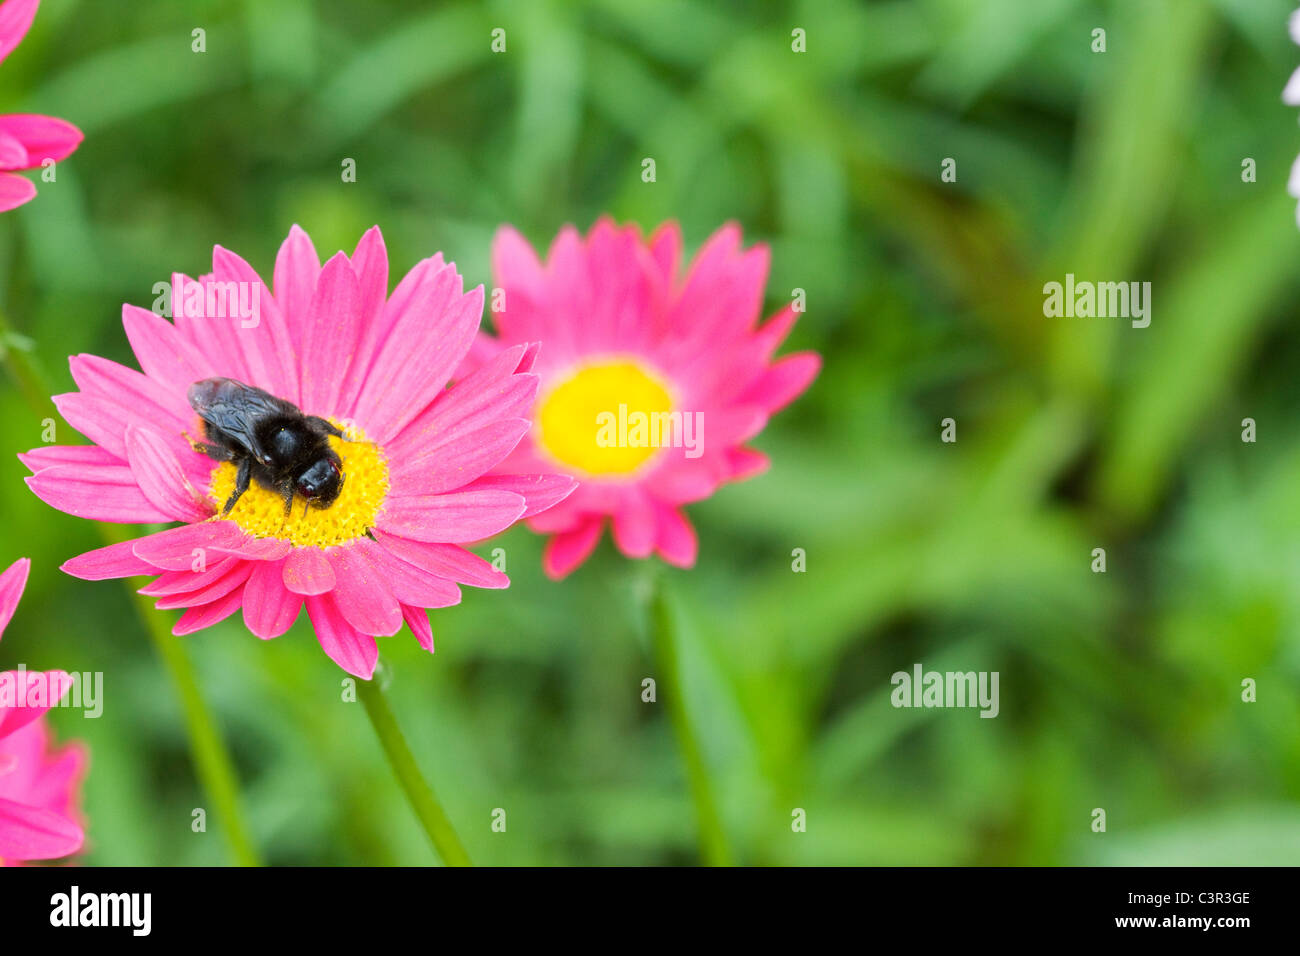 A Bee Gathering Nectar From a Tanacetum coccineum (Painted Daisy) Shallow DOF Stock Photo